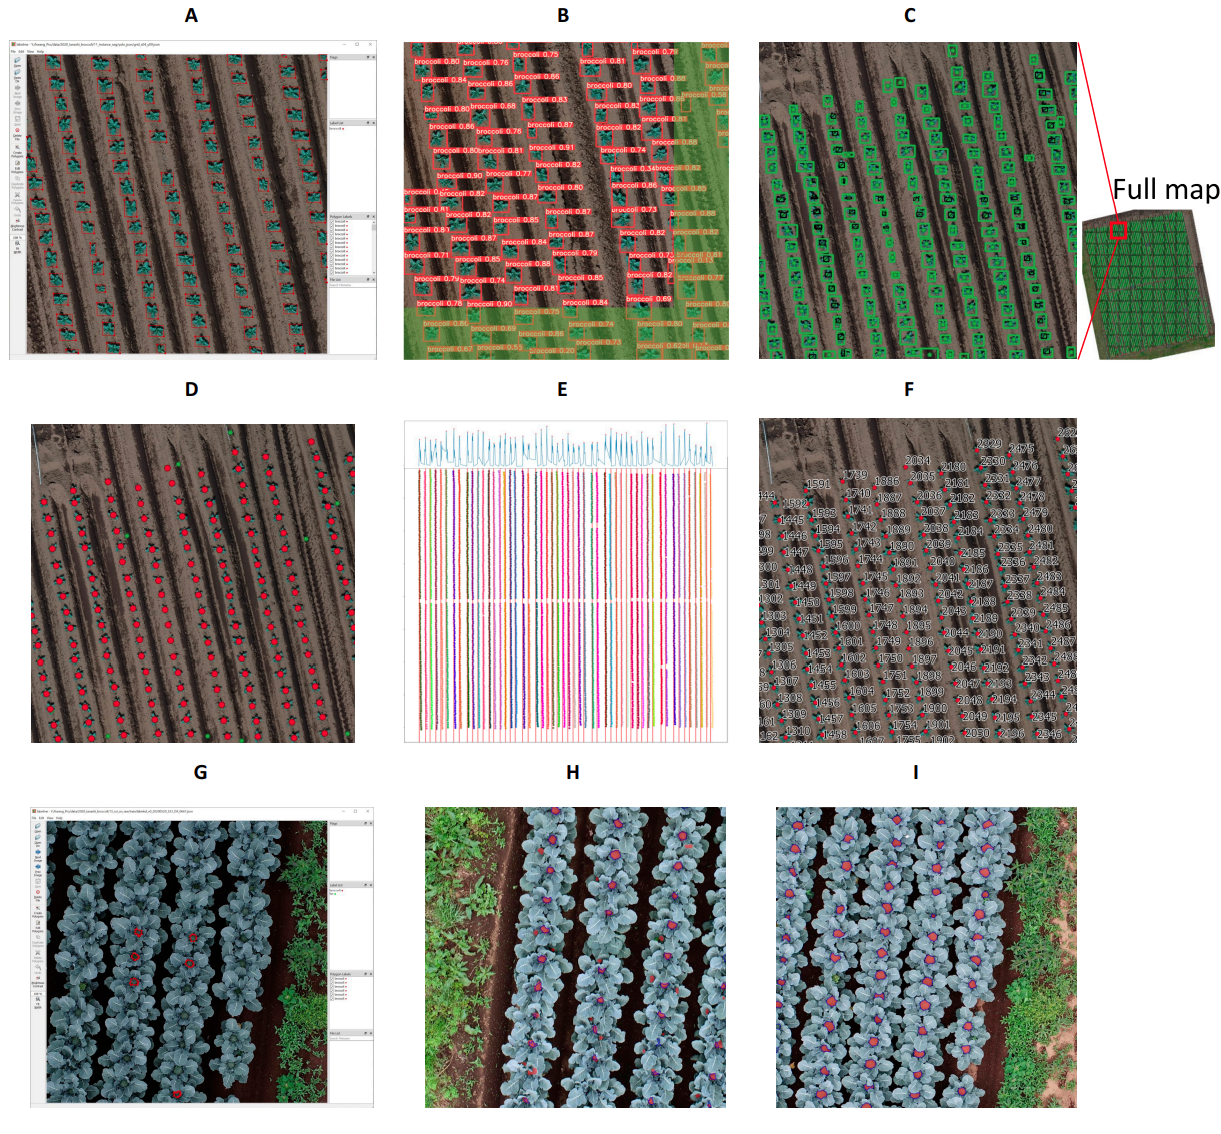 Nine squares, each showing an aerial view of a field with different data overlaid.